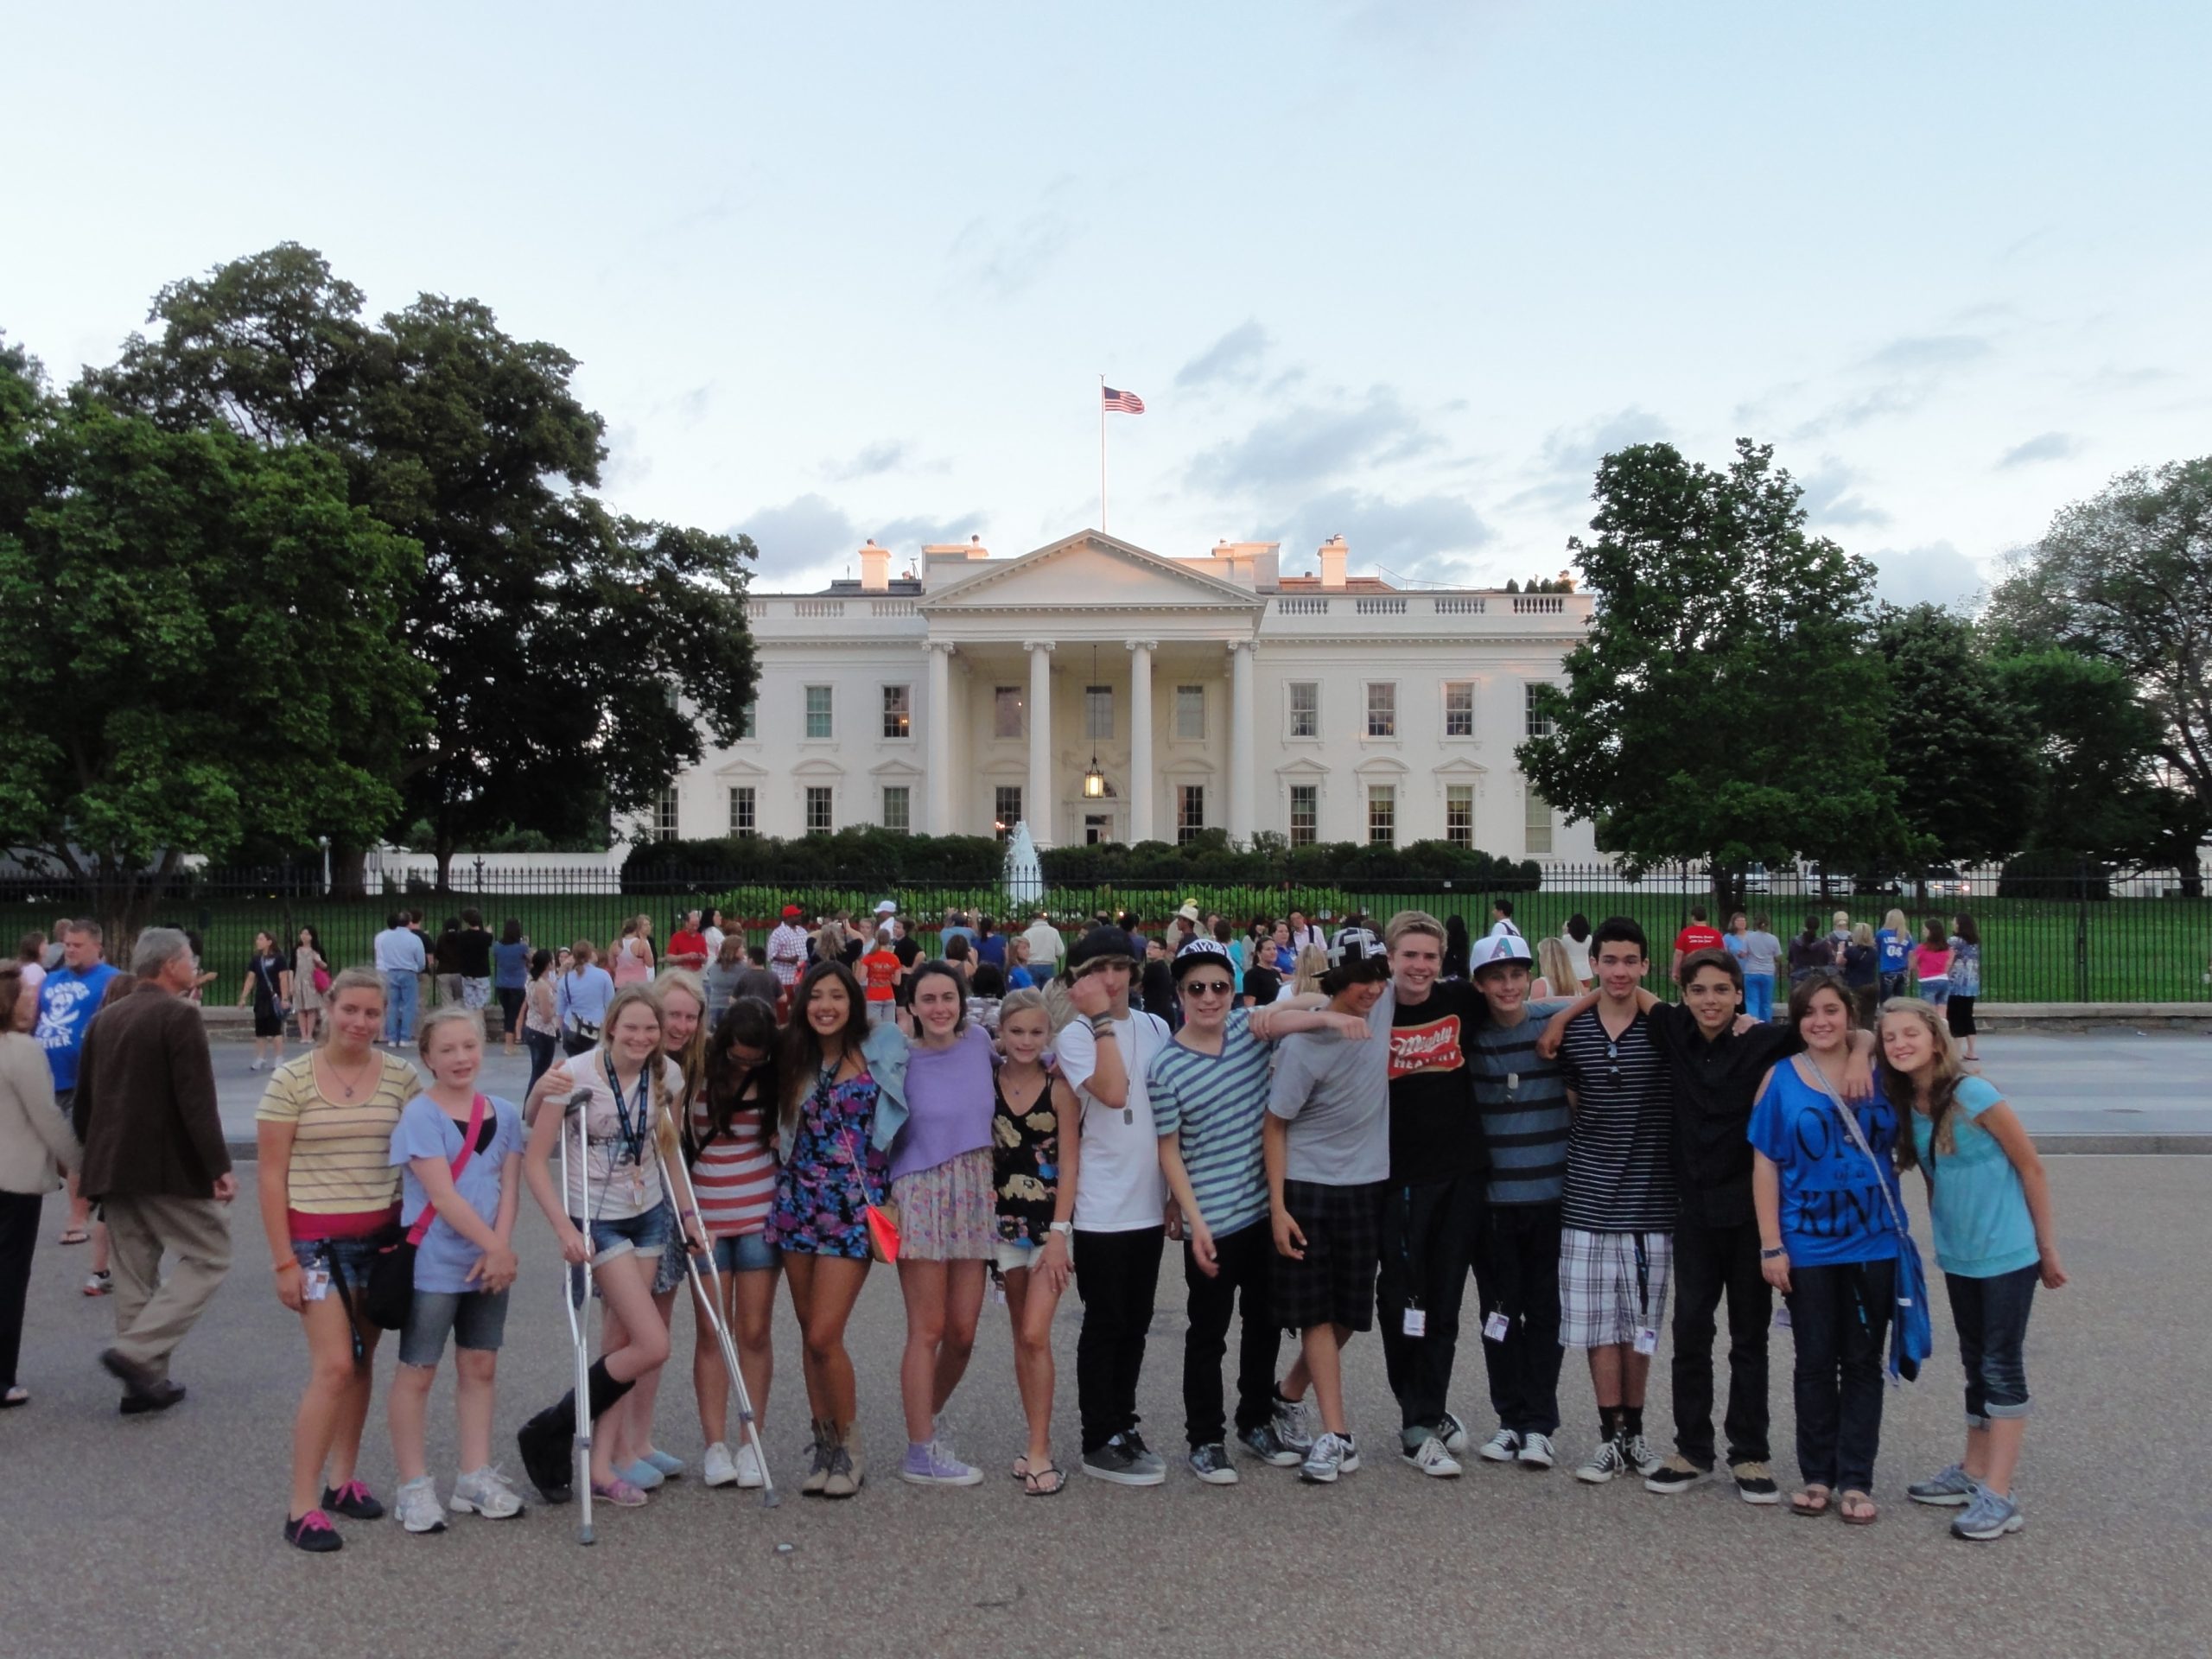 group of young students in front of the White House in Washington DC